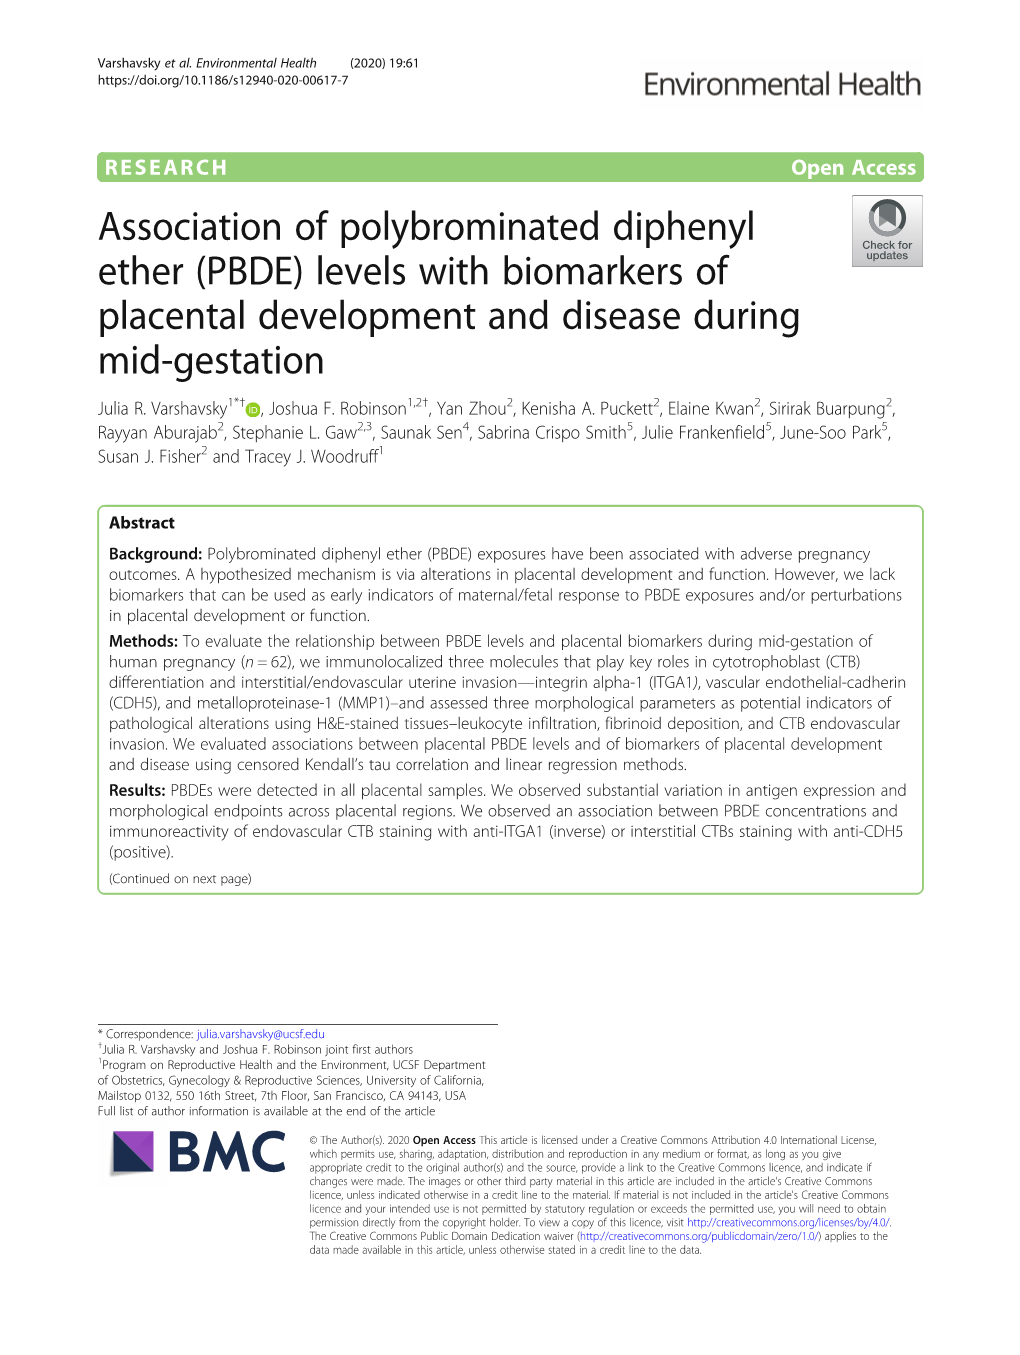 PBDE) Levels with Biomarkers of Placental Development and Disease During Mid-Gestation Julia R